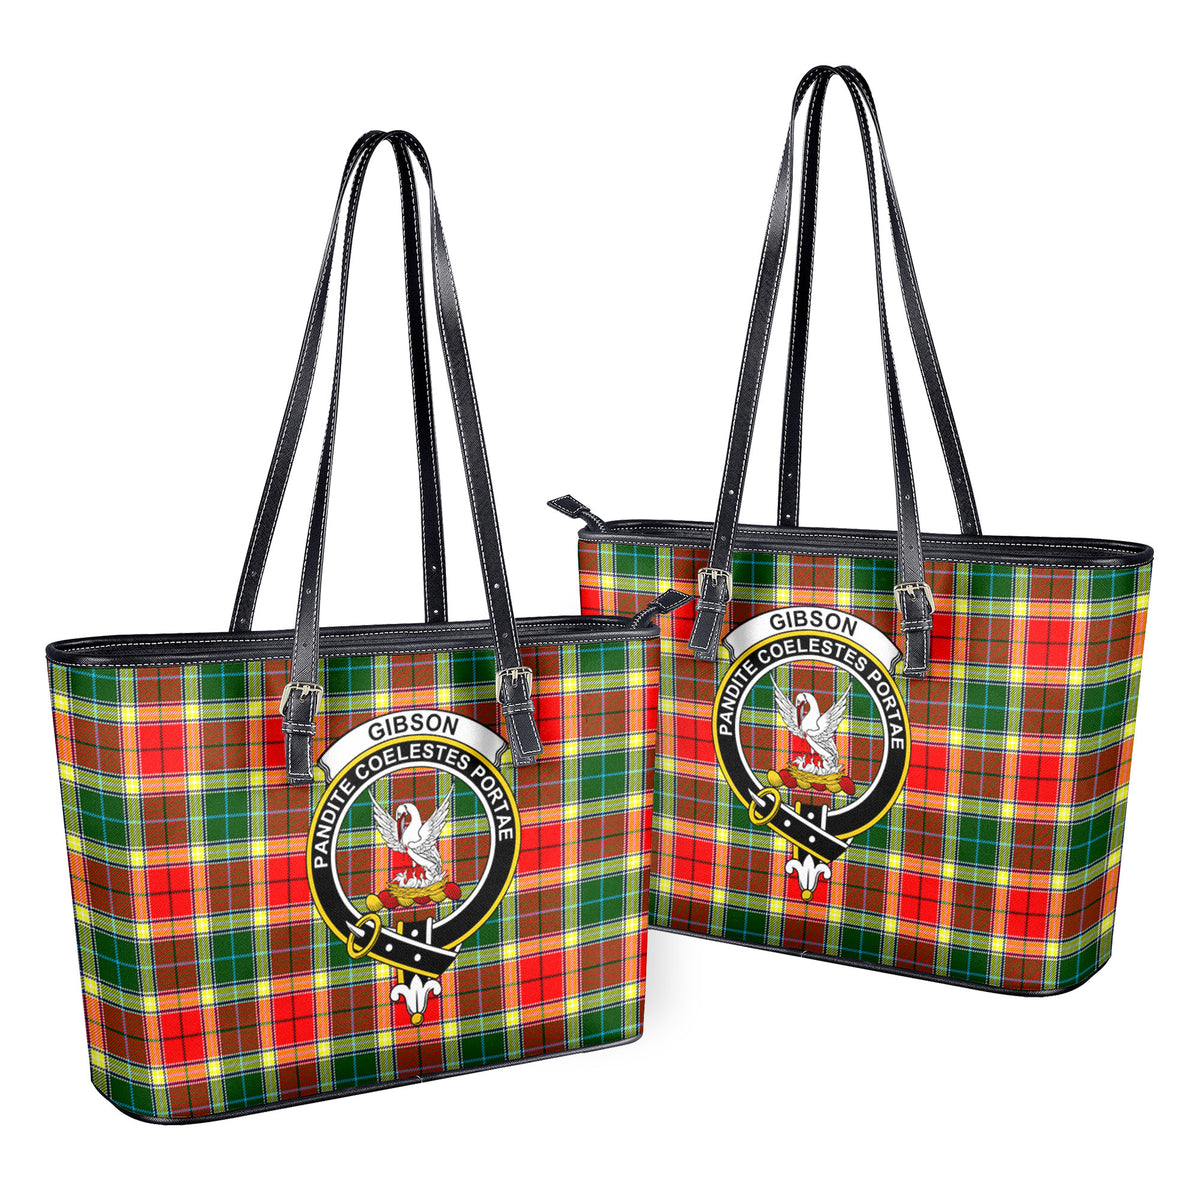 Gibson Tartan Crest Leather Tote Bag